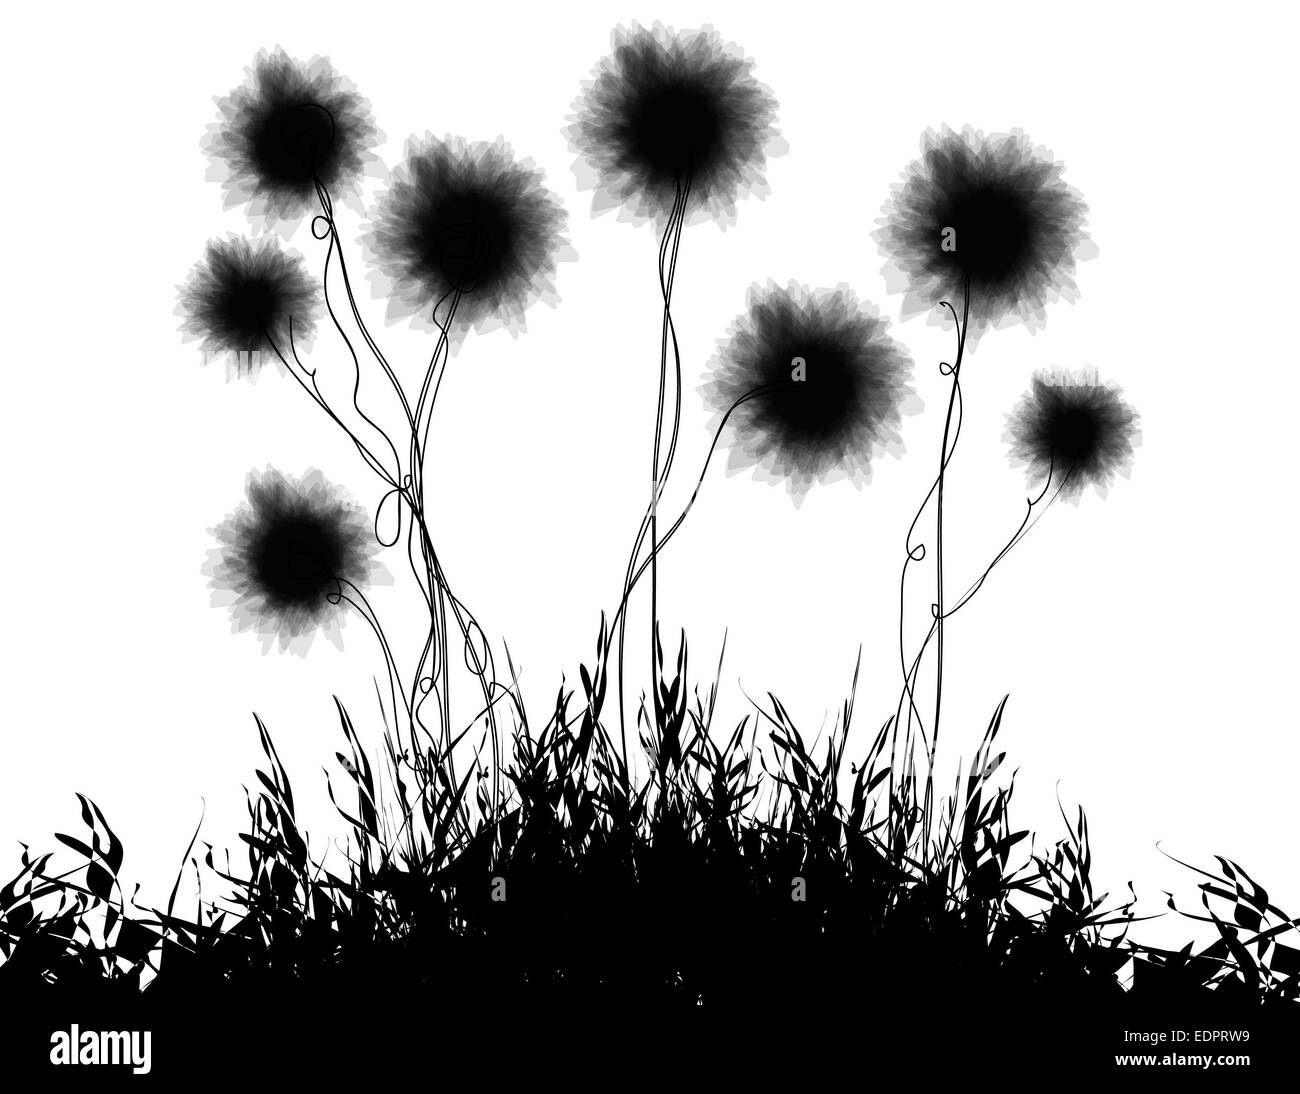 Freestyle black & white illustration of a family of beautiful dandelions growing on grass for decorative or romantic themes Stock Photo